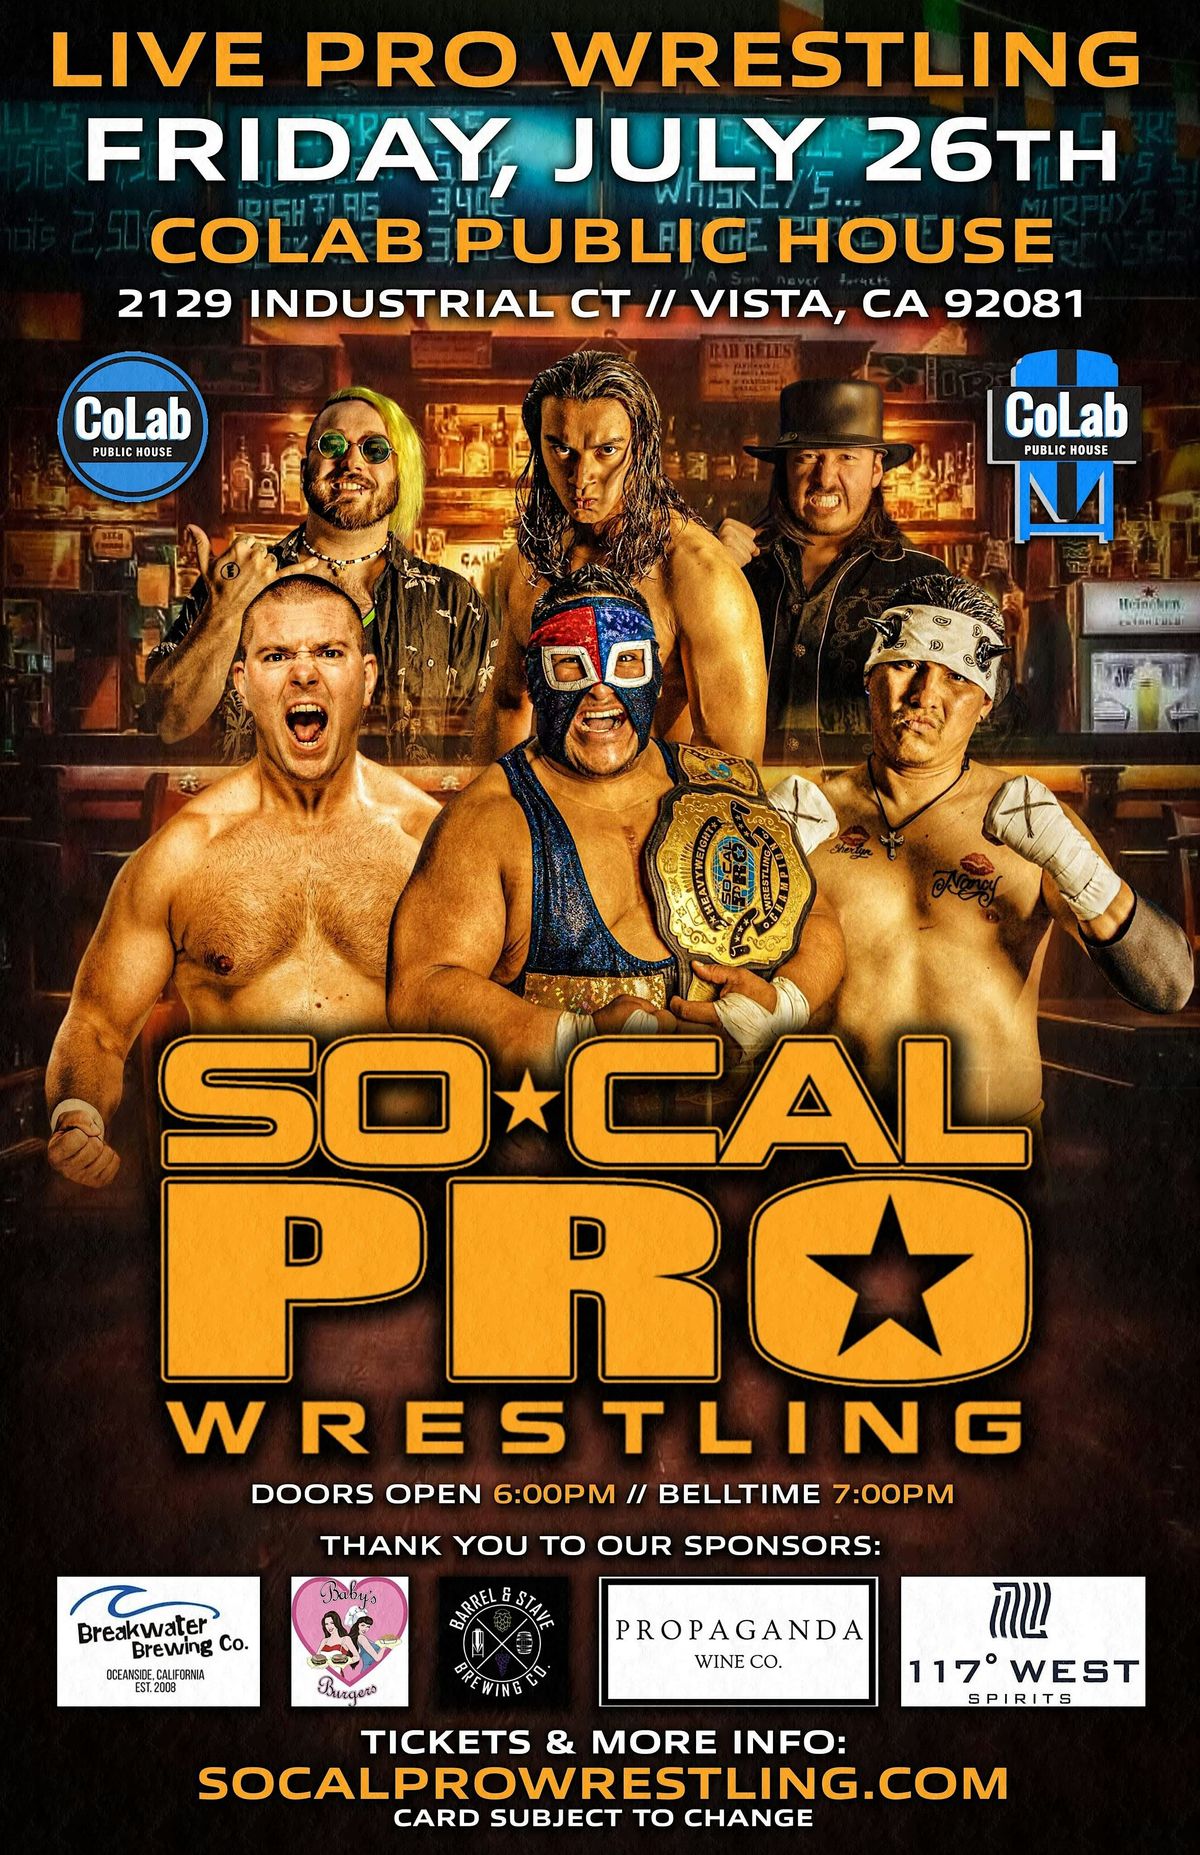 Live Pro Wrestling with SoCal Pro